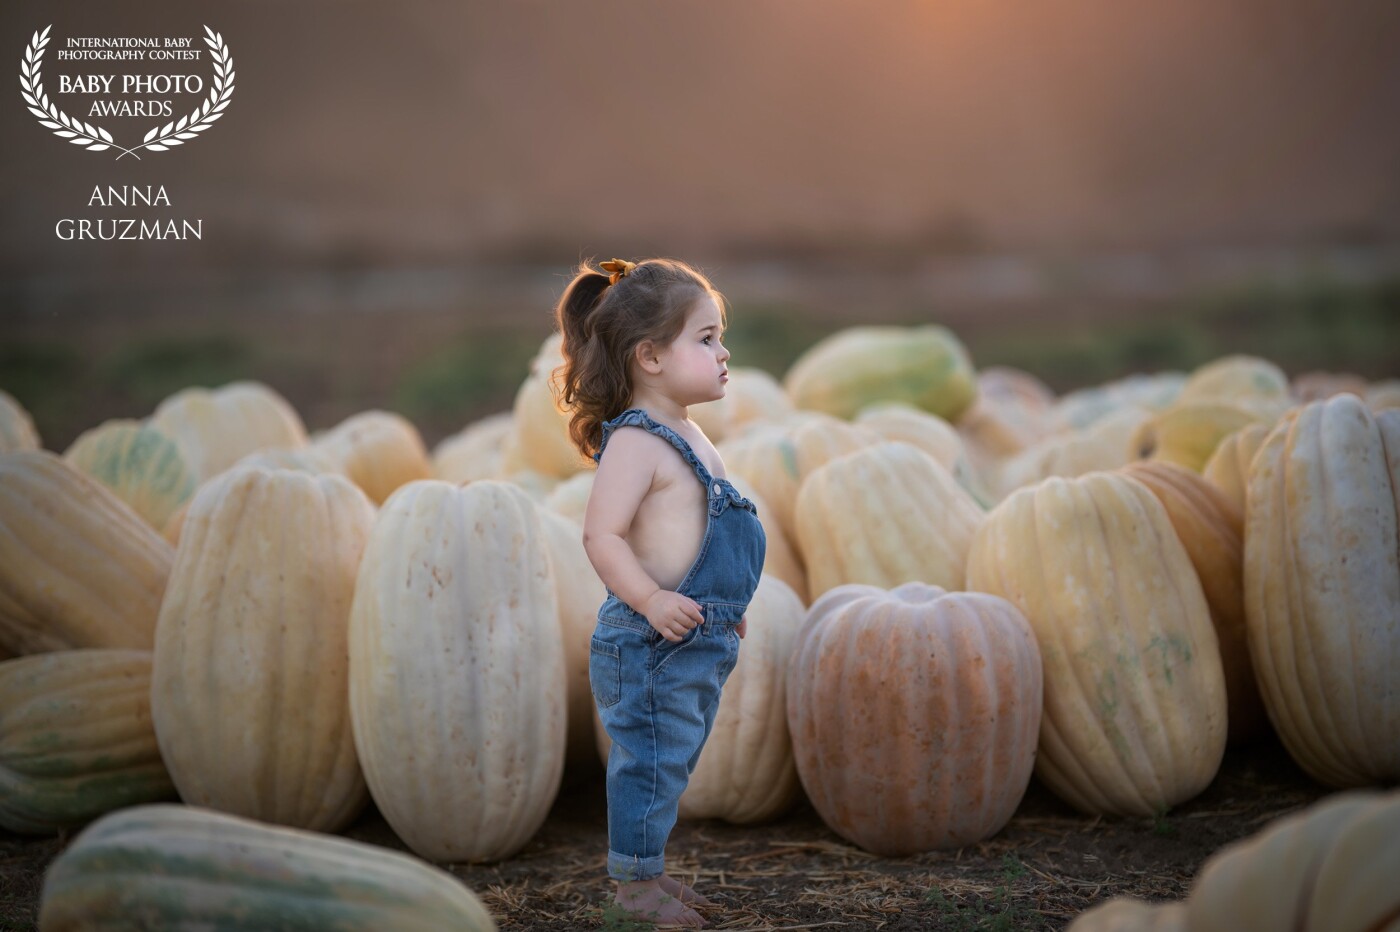 While wandering around our favorite spot with my husband, I saw from a far distance a hidden field full of these giant pumpkins. immediately I knew I must return here with my little pumpkin (Emma) for a photo shoot. I guess I'm in Love with Pumpkins :)